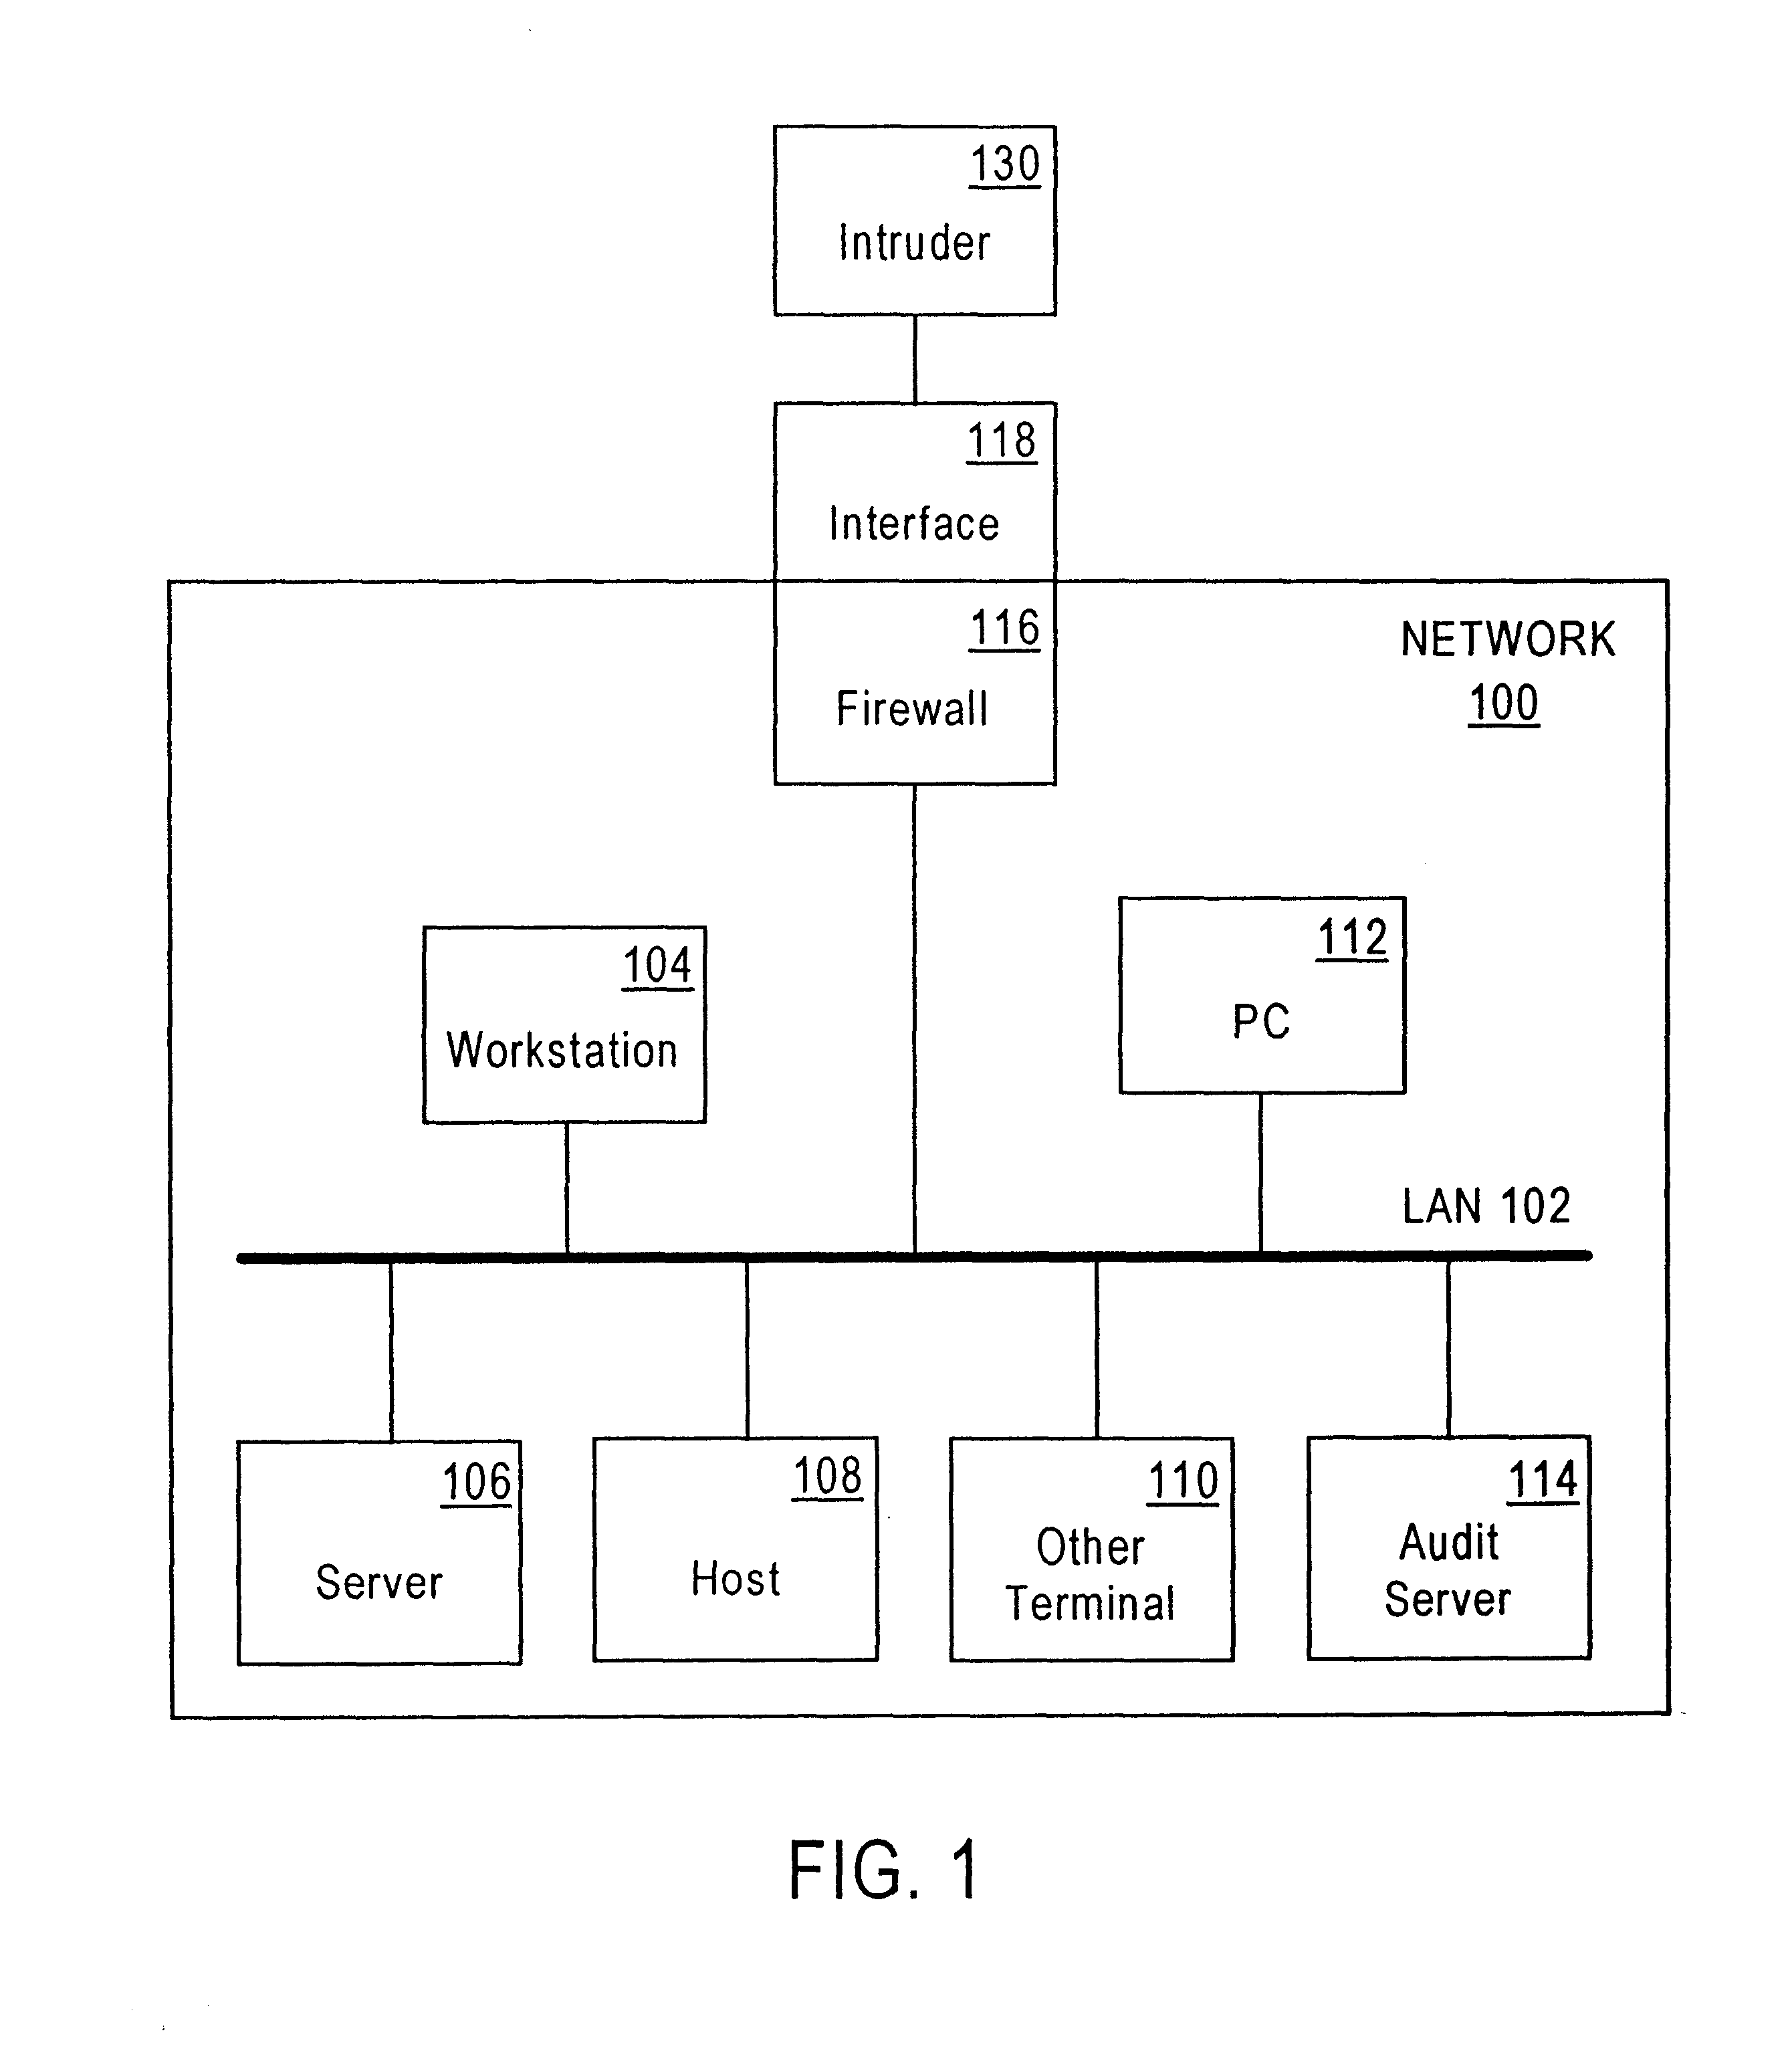 Method and system for detecting intrusion into and misuse of a data processing system